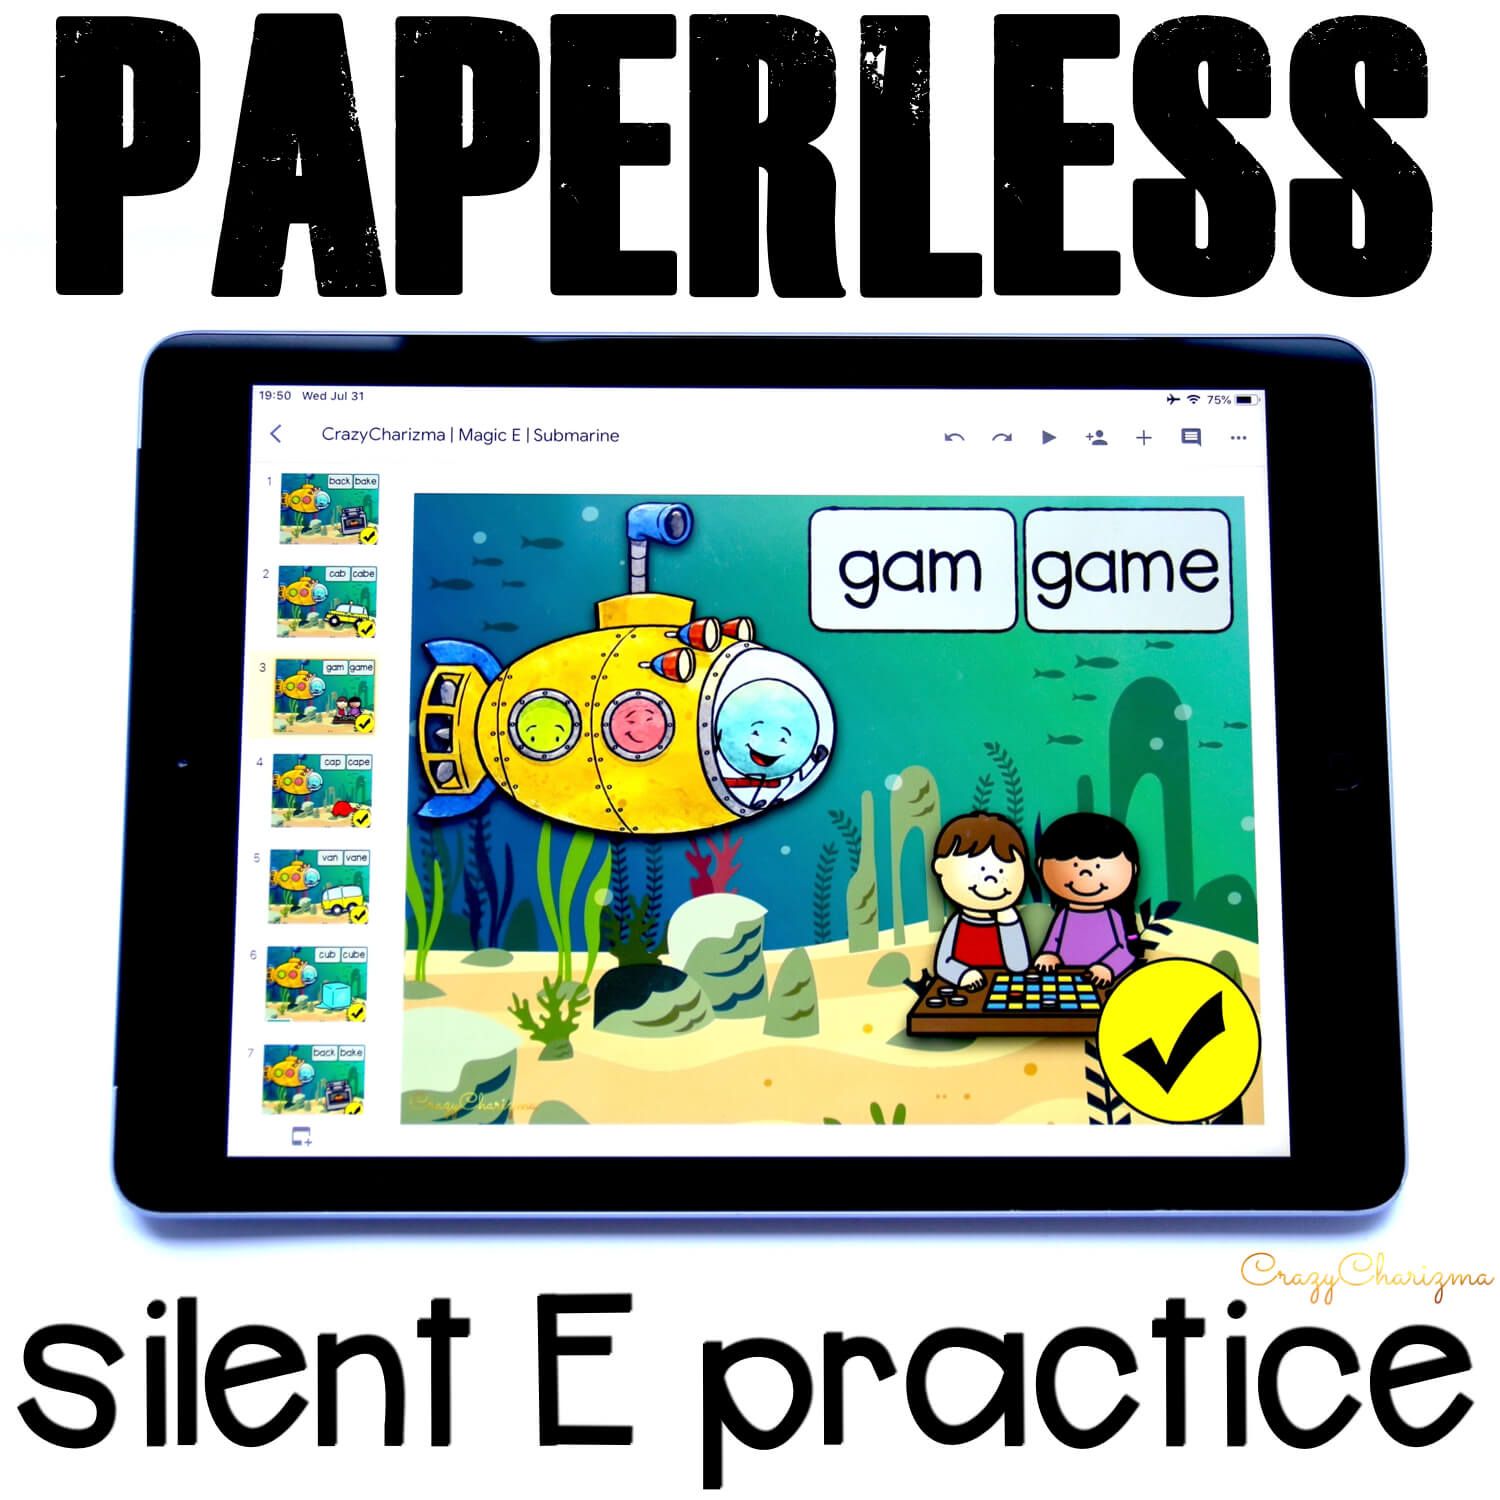 Need a cool game to practice magic E? No matter what they call it (silent e or sneaky e), your kids will enjoy this paperless activity. It's perfect for iPads and Chromebooks. Have fun with Google Classroom!